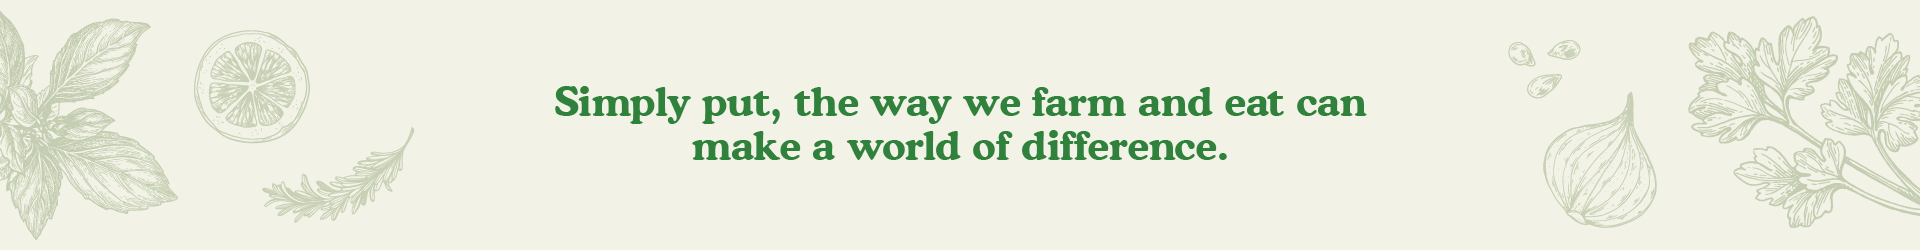 The way we farm and eat can make a world of difference